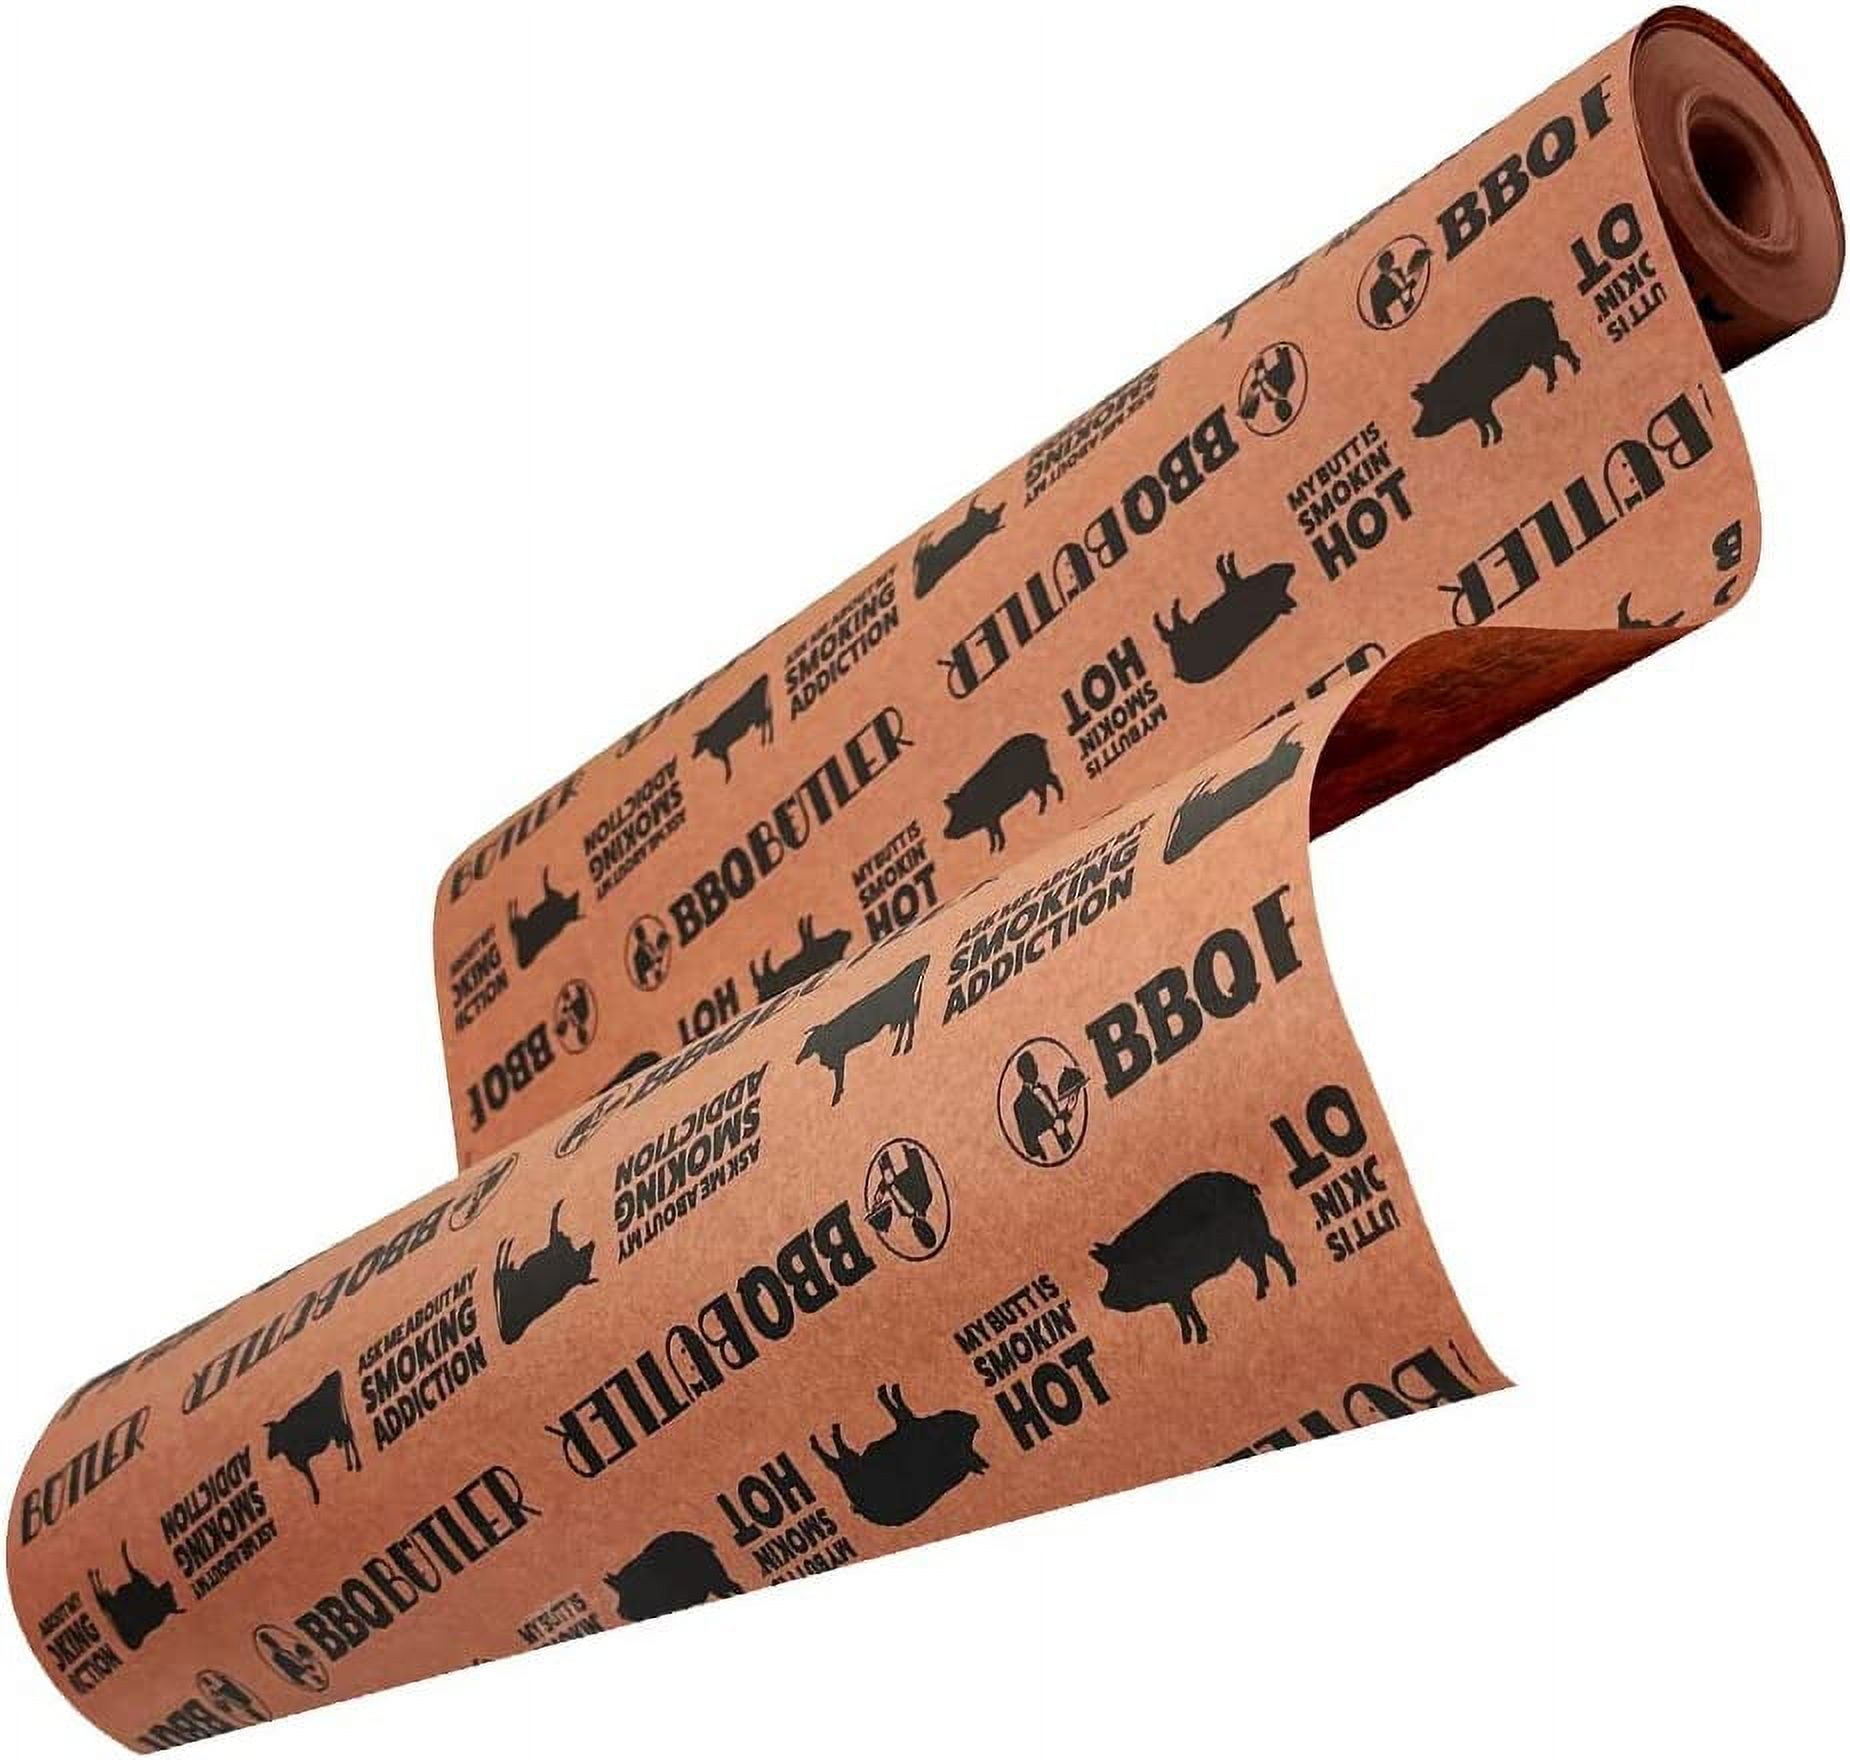 Pink Butcher BBQ Paper Refill Roll for Dispenser Box (17.25 inch by 175 Feet) - Food Grade Peach Wrapping Paper for Smoking Beef Brisket Meat Texas